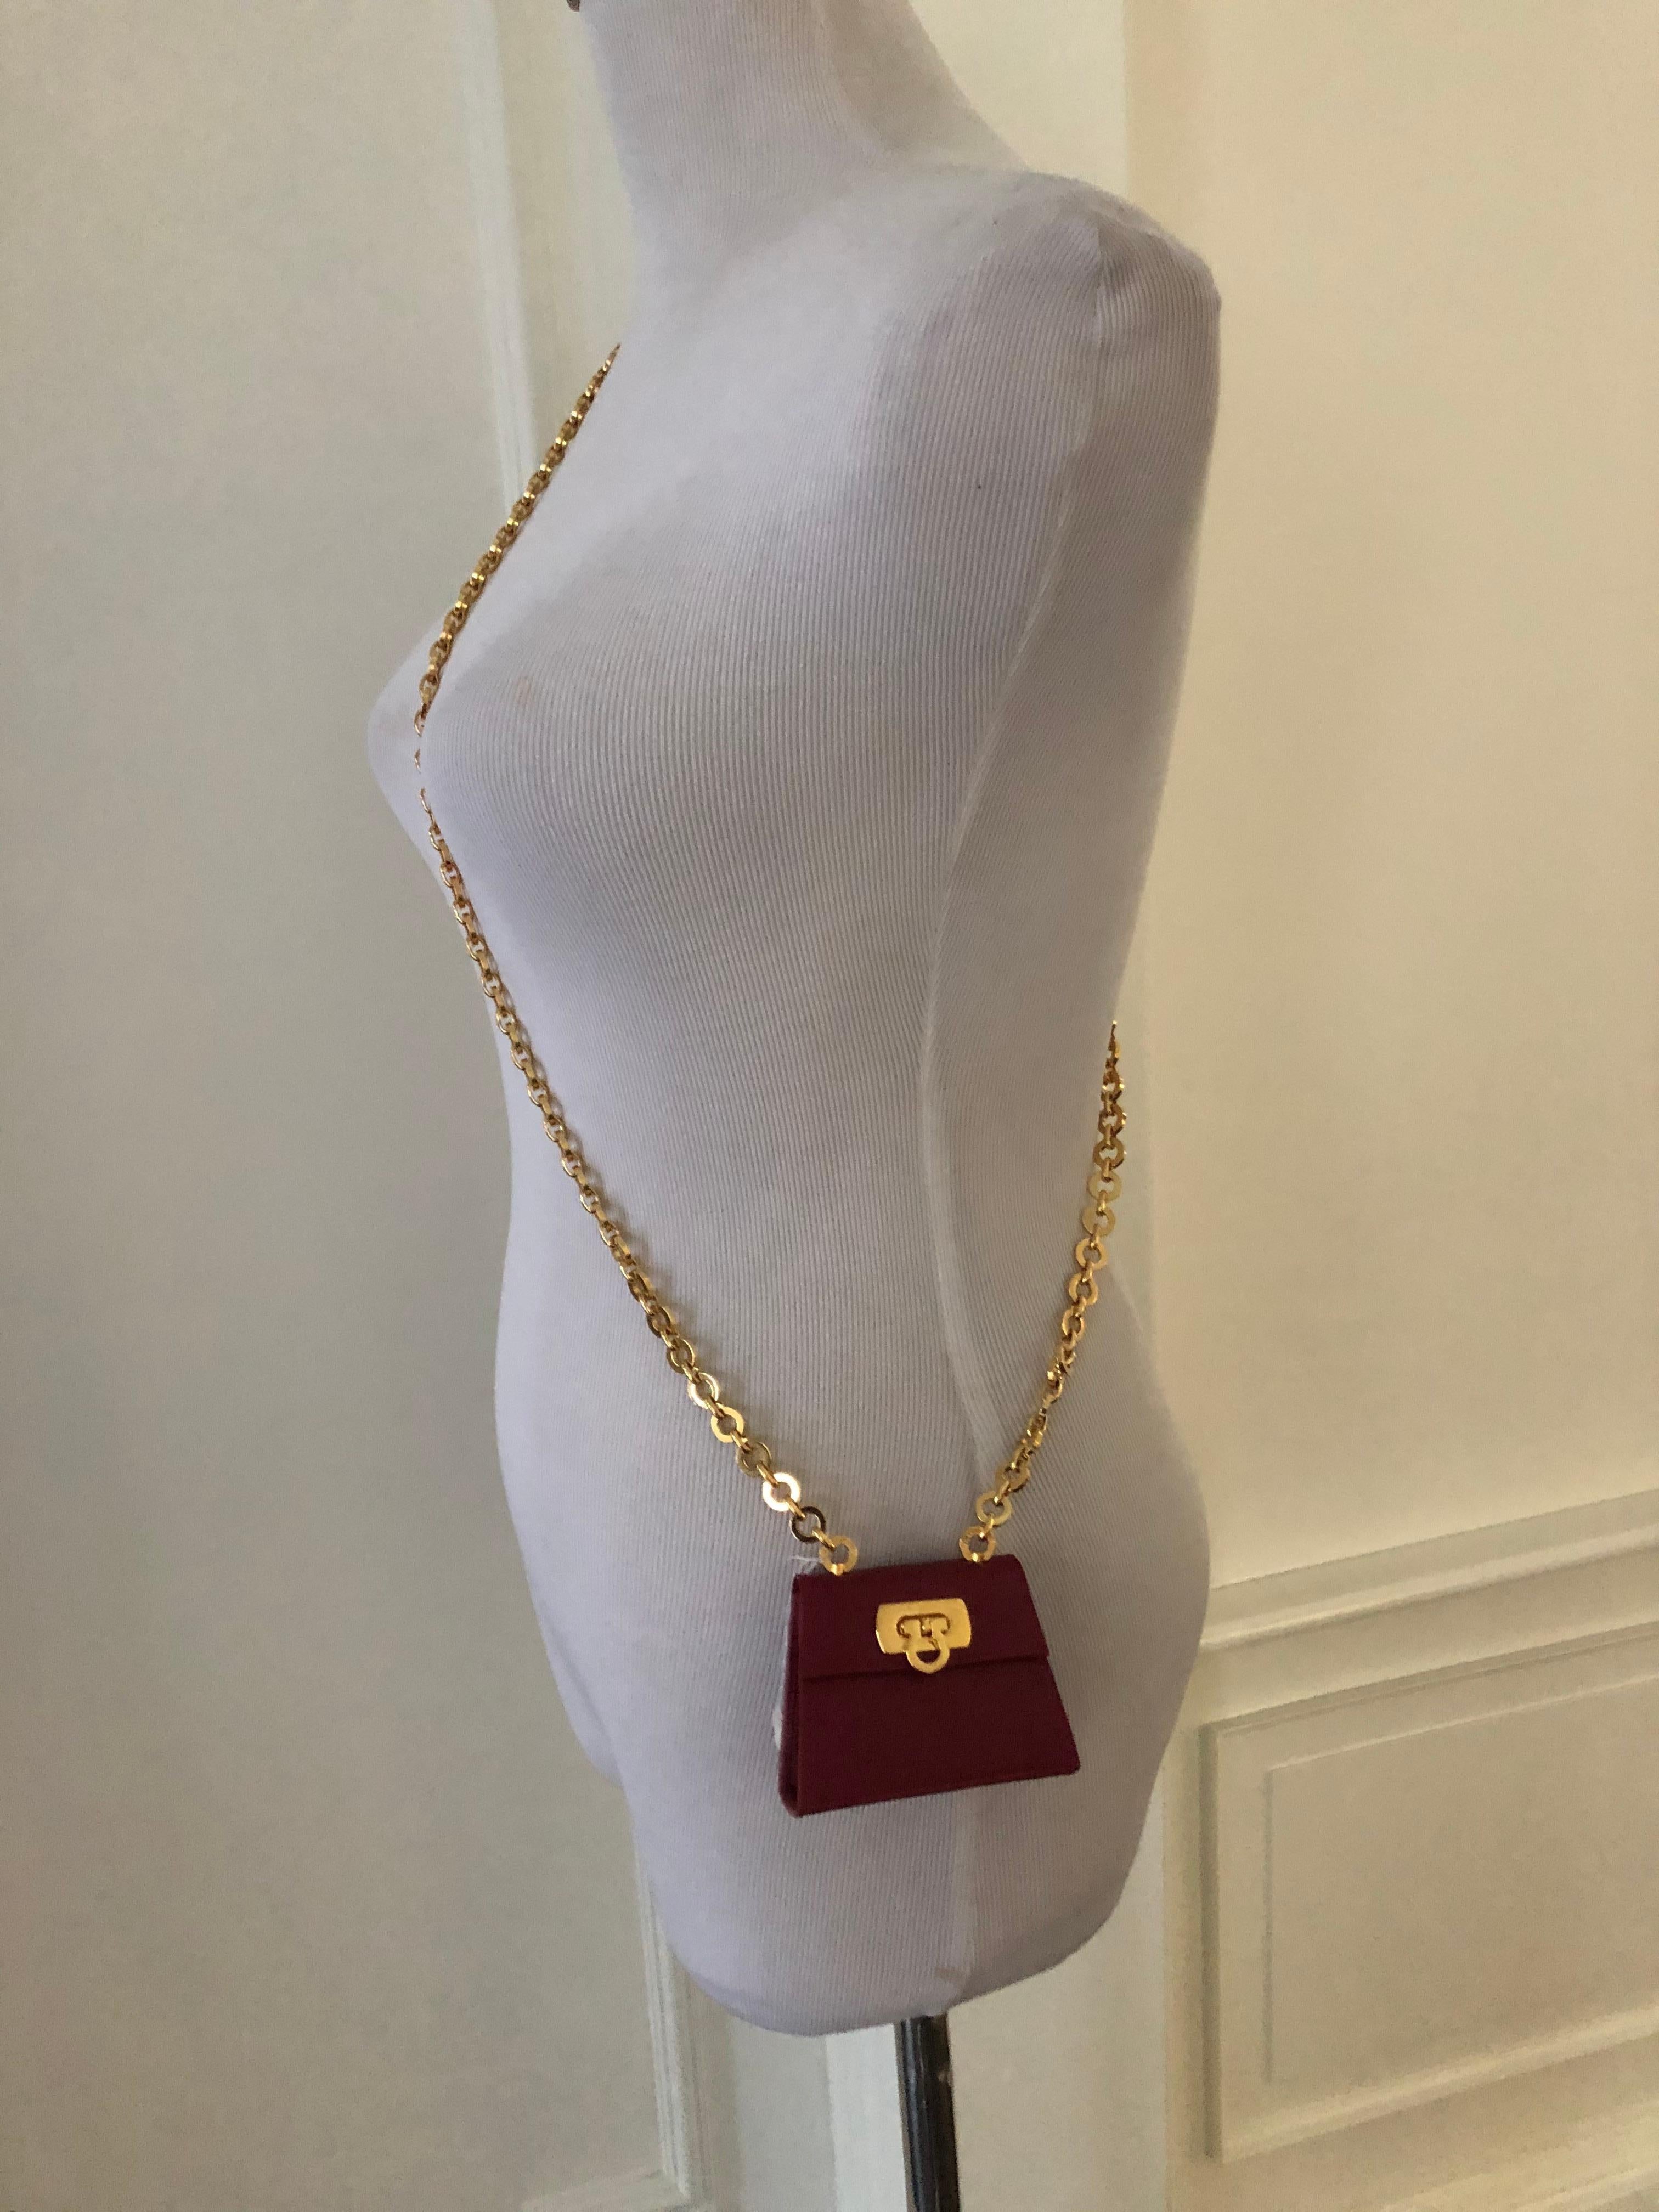 Excellent, never worn red leather mini chain bag.
Foldover top with gold plated metal.Flip lock closure.
Can be worn as a necklace, belt or cross body.
Measurements
Chain drop 211/2